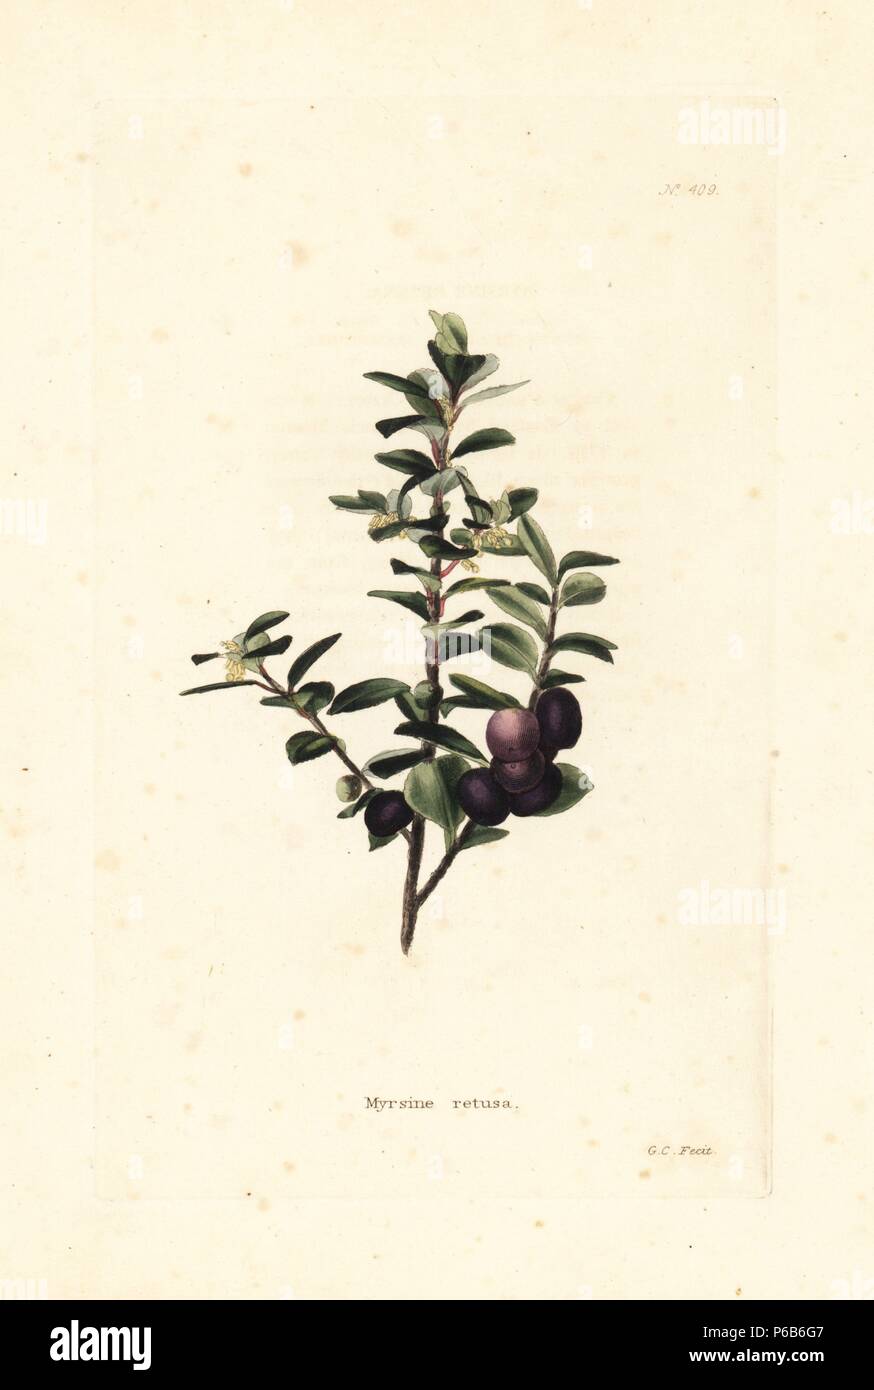 Cape Myrtle or African boxwood, Myrsine africana. Handcoloured copperplate engraving by George Cooke from Conrad Loddiges' Botanical Cabinet, London, 1810. Stock Photo